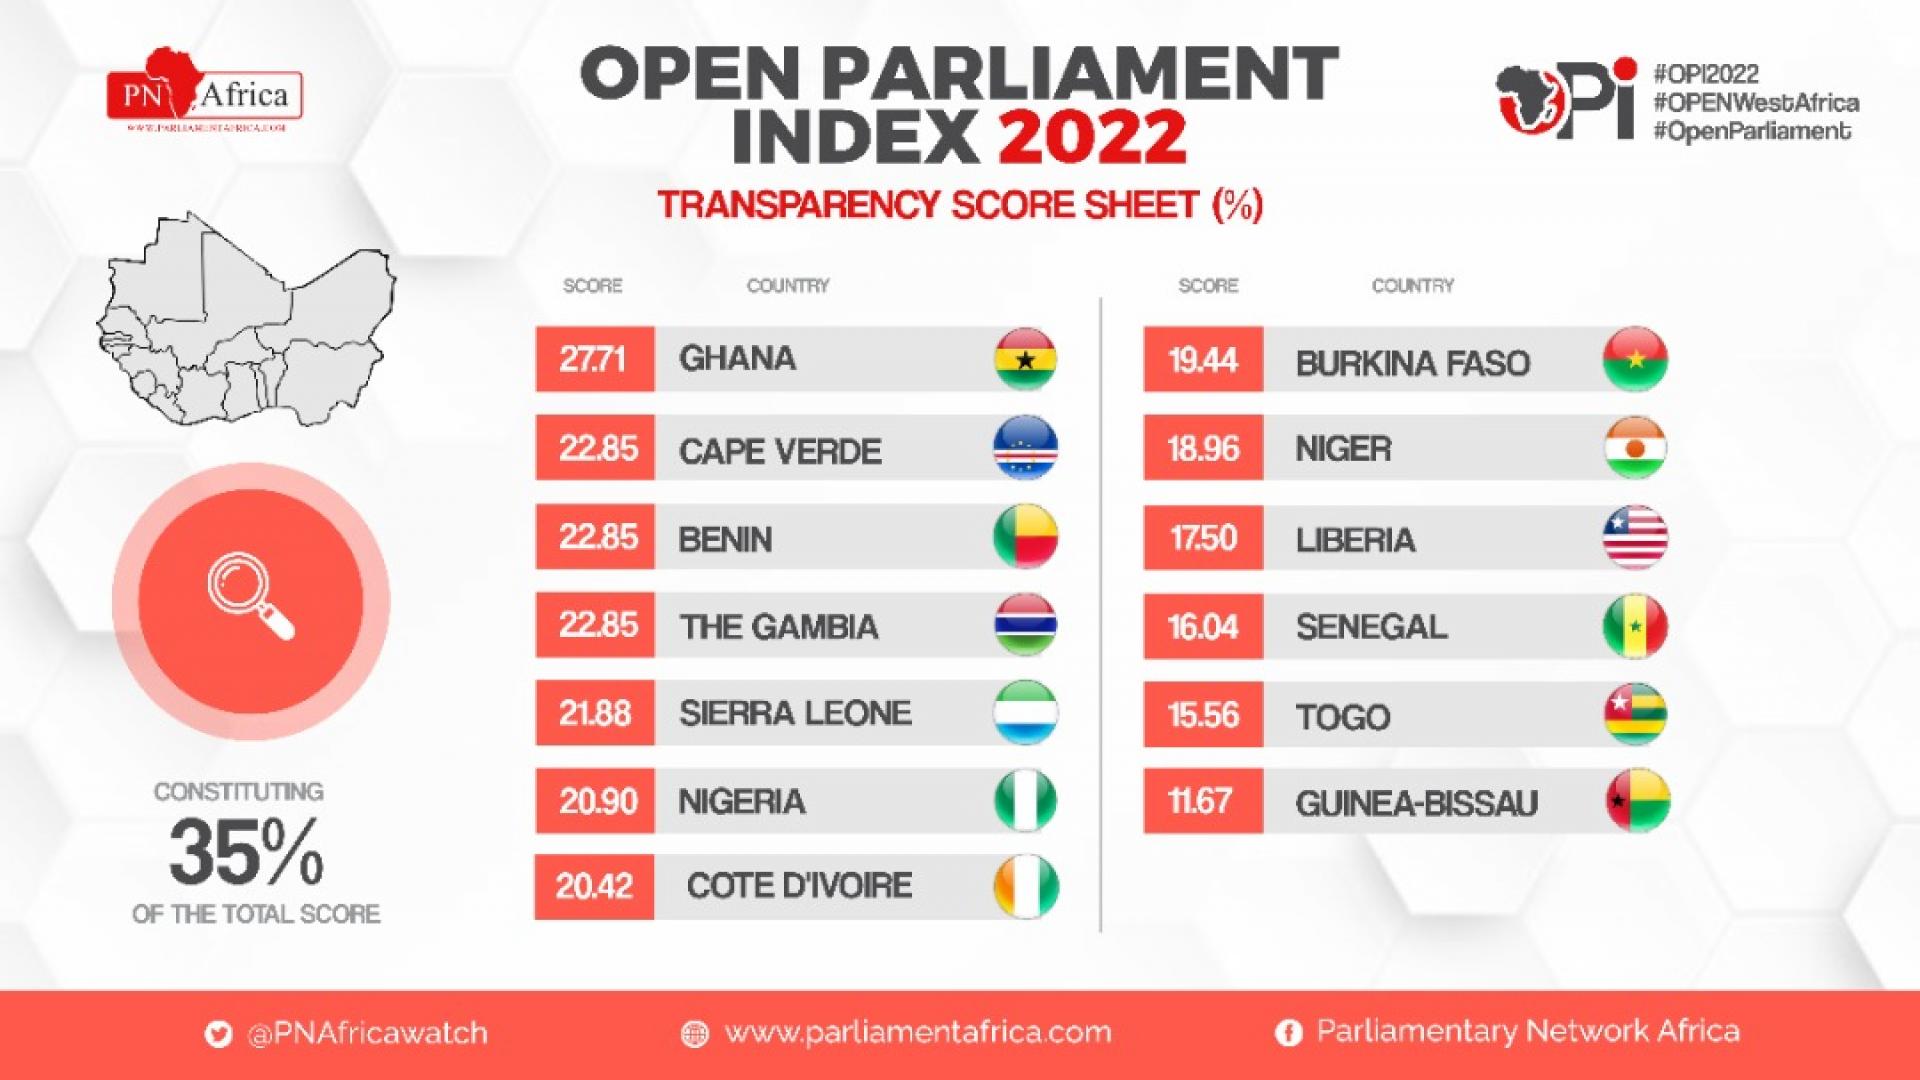 Scoresheet of the Open Parliament Index in West Africa with Sierra Leone coming fifth after Ghana, Cape Verde, Benin, and the Gambia in Transparency indicator